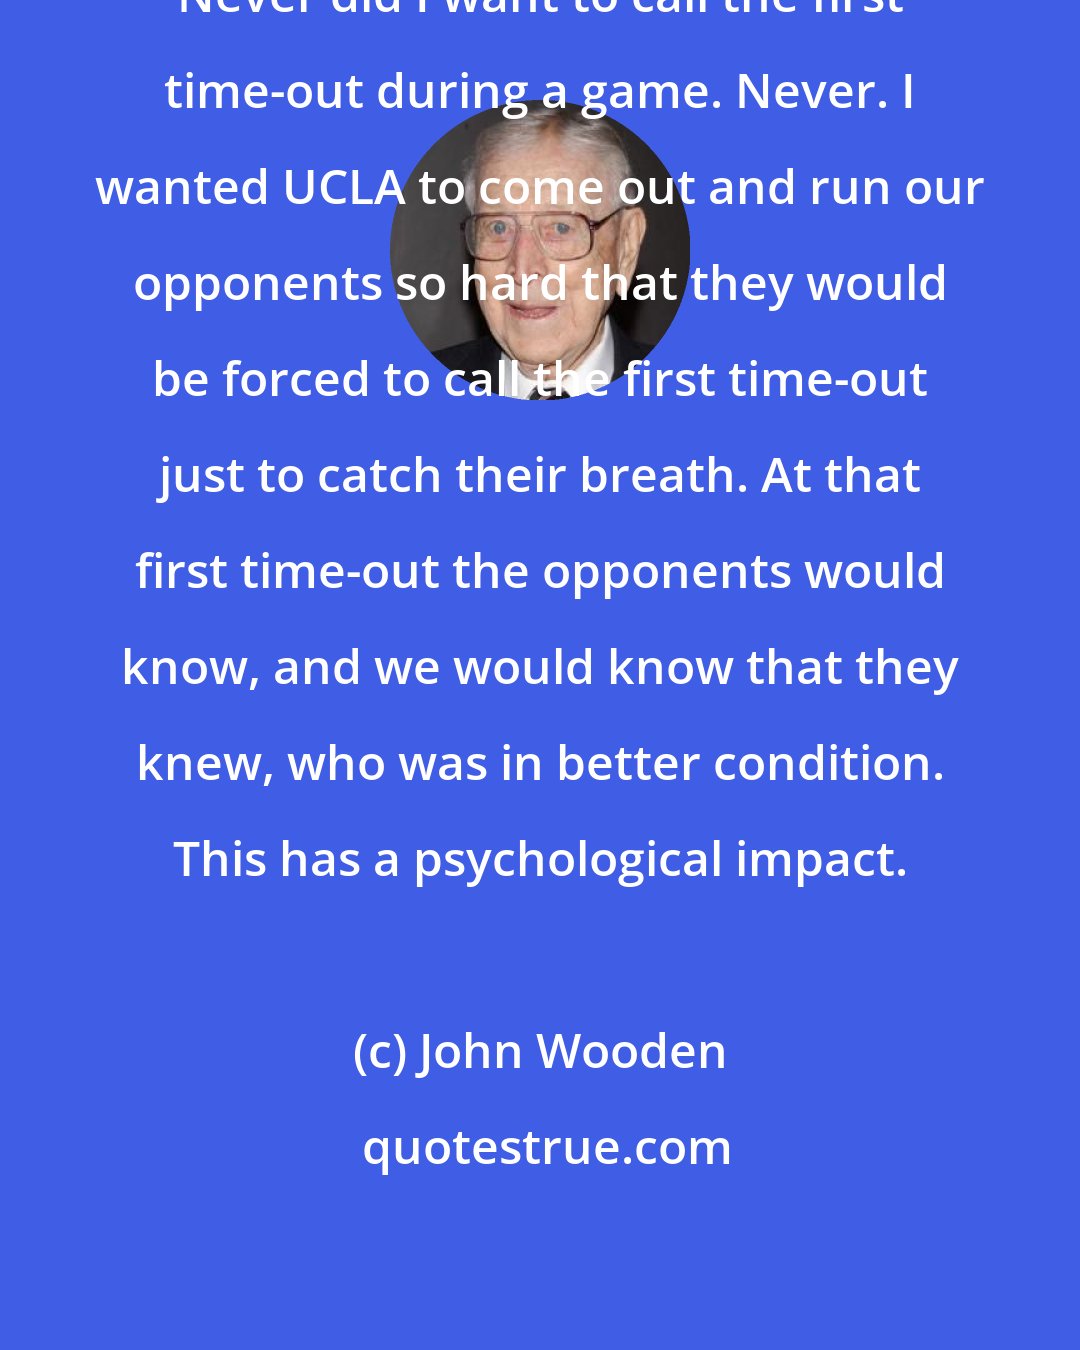 John Wooden: Never did I want to call the first time-out during a game. Never. I wanted UCLA to come out and run our opponents so hard that they would be forced to call the first time-out just to catch their breath. At that first time-out the opponents would know, and we would know that they knew, who was in better condition. This has a psychological impact.